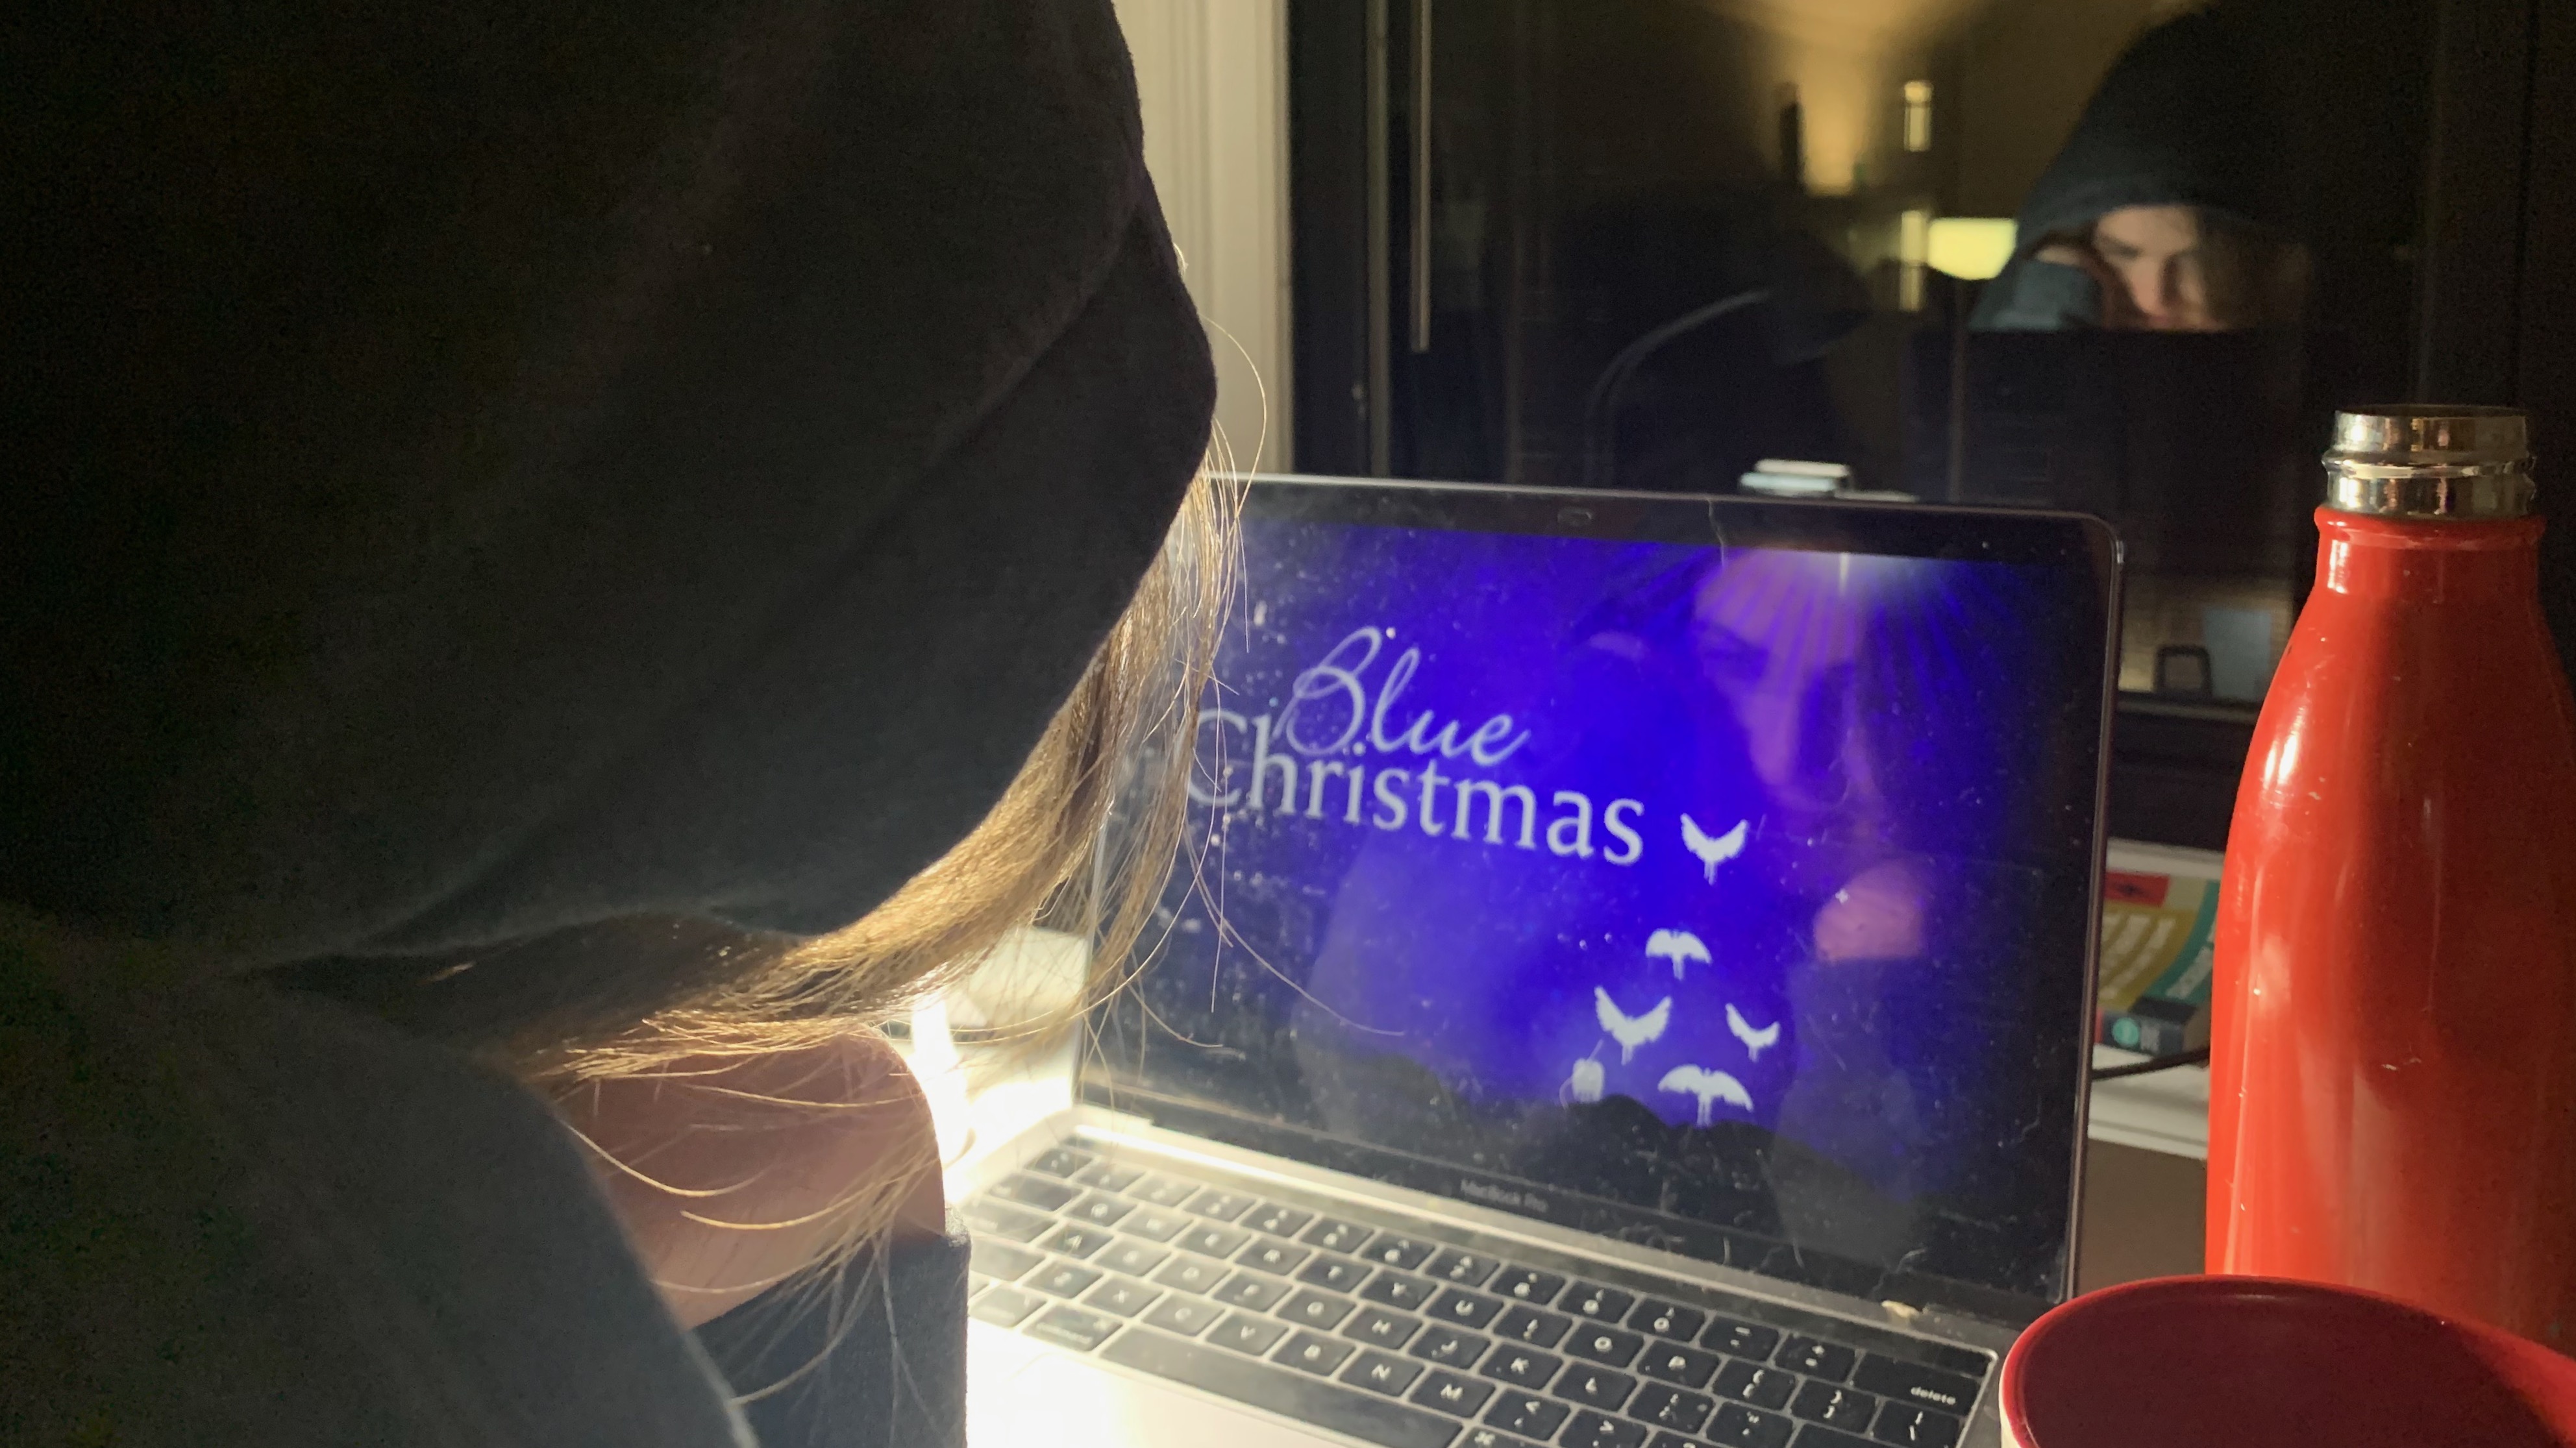 Person looking at a screen that says "Blue Christmas".